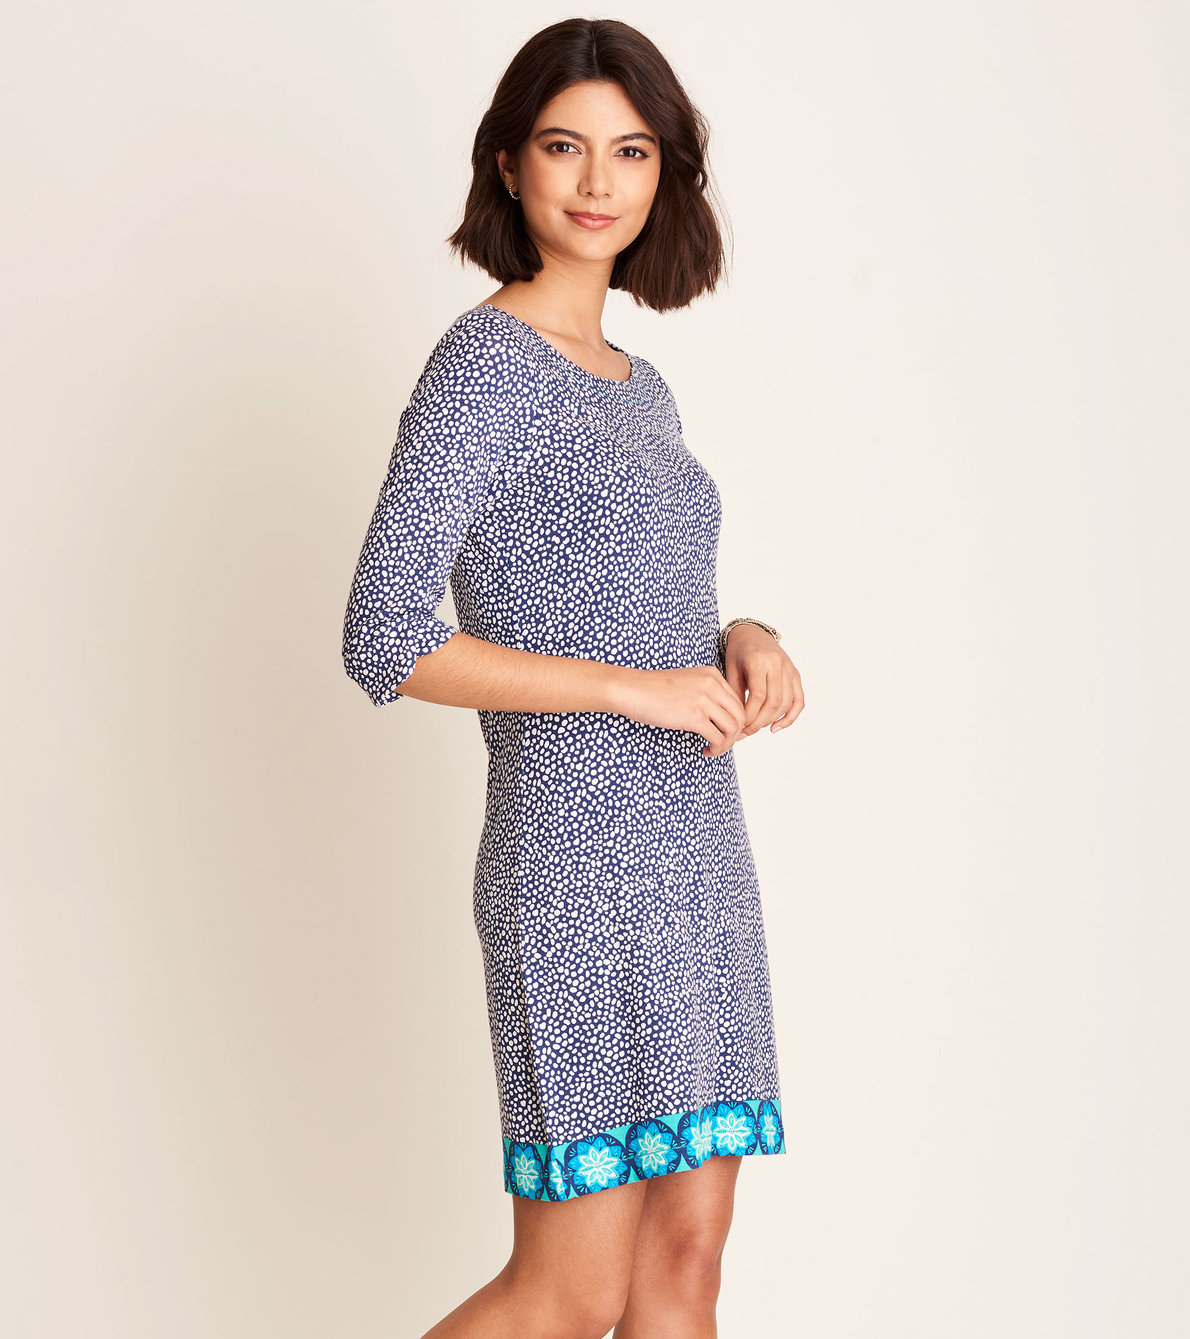 View larger image of Lucy Dress - Blue Micro dots